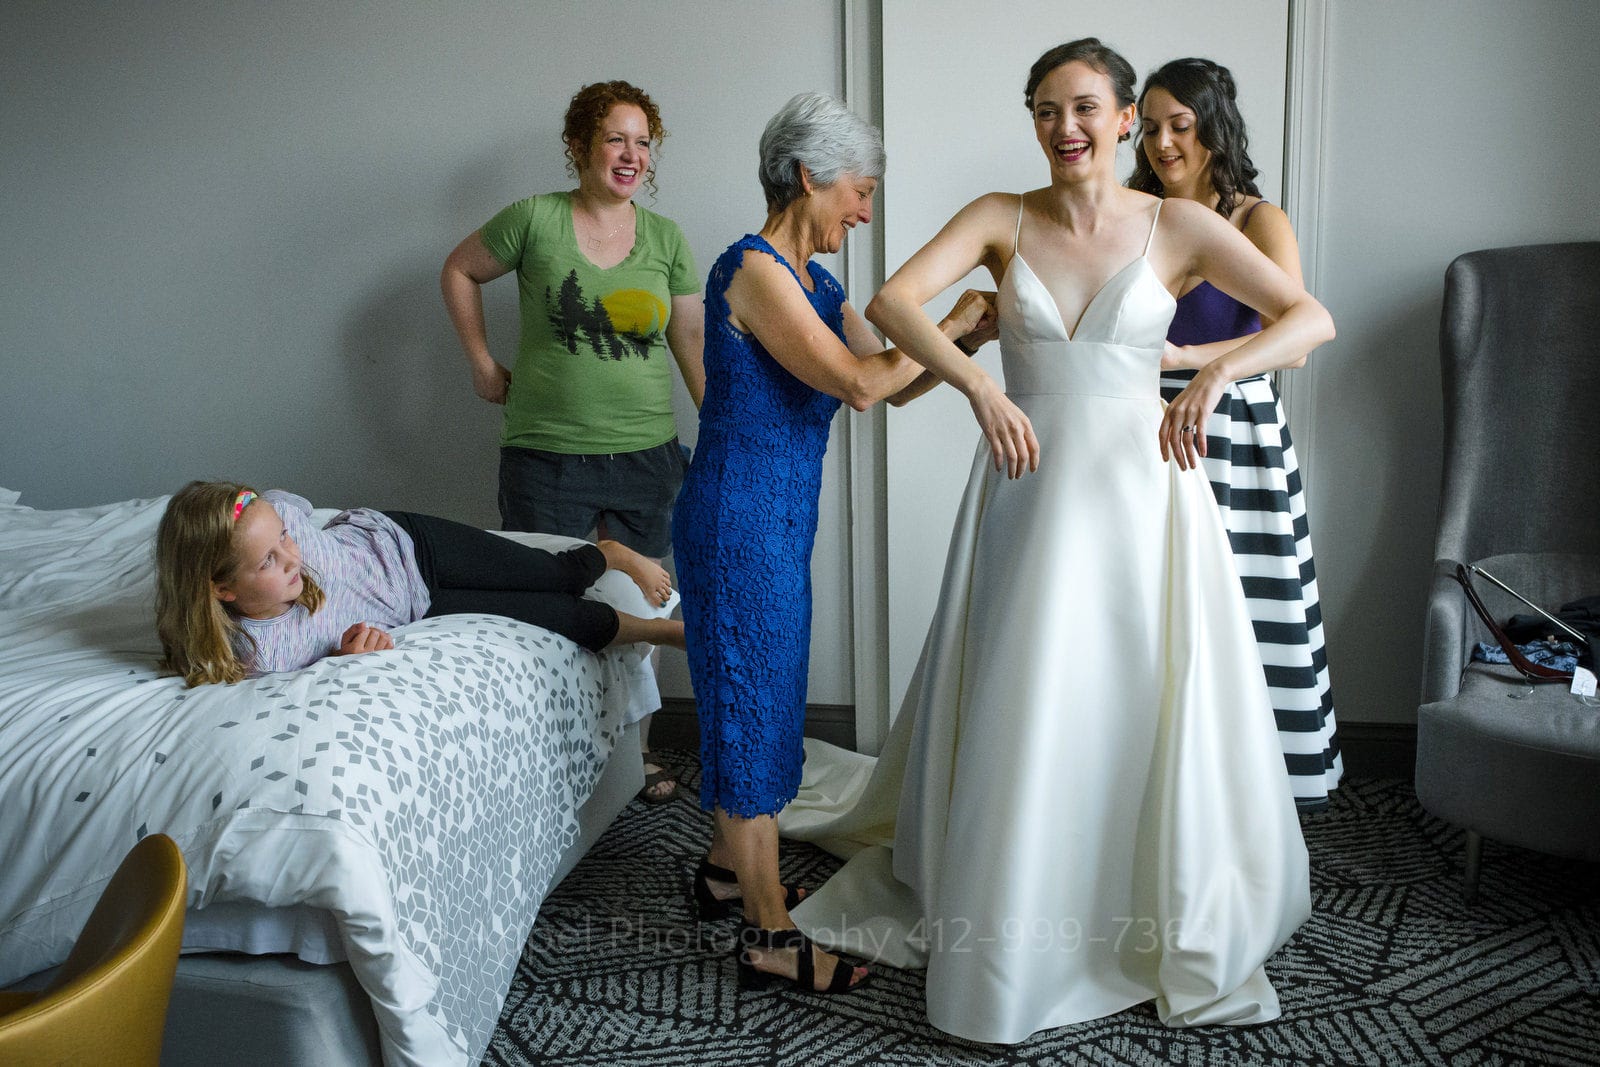 A bride smiles as her mother and a bridesmaid button up the back of the dress. A woman in a green t-shirt watches behind them and a young girl lays on a bed next to them watching.